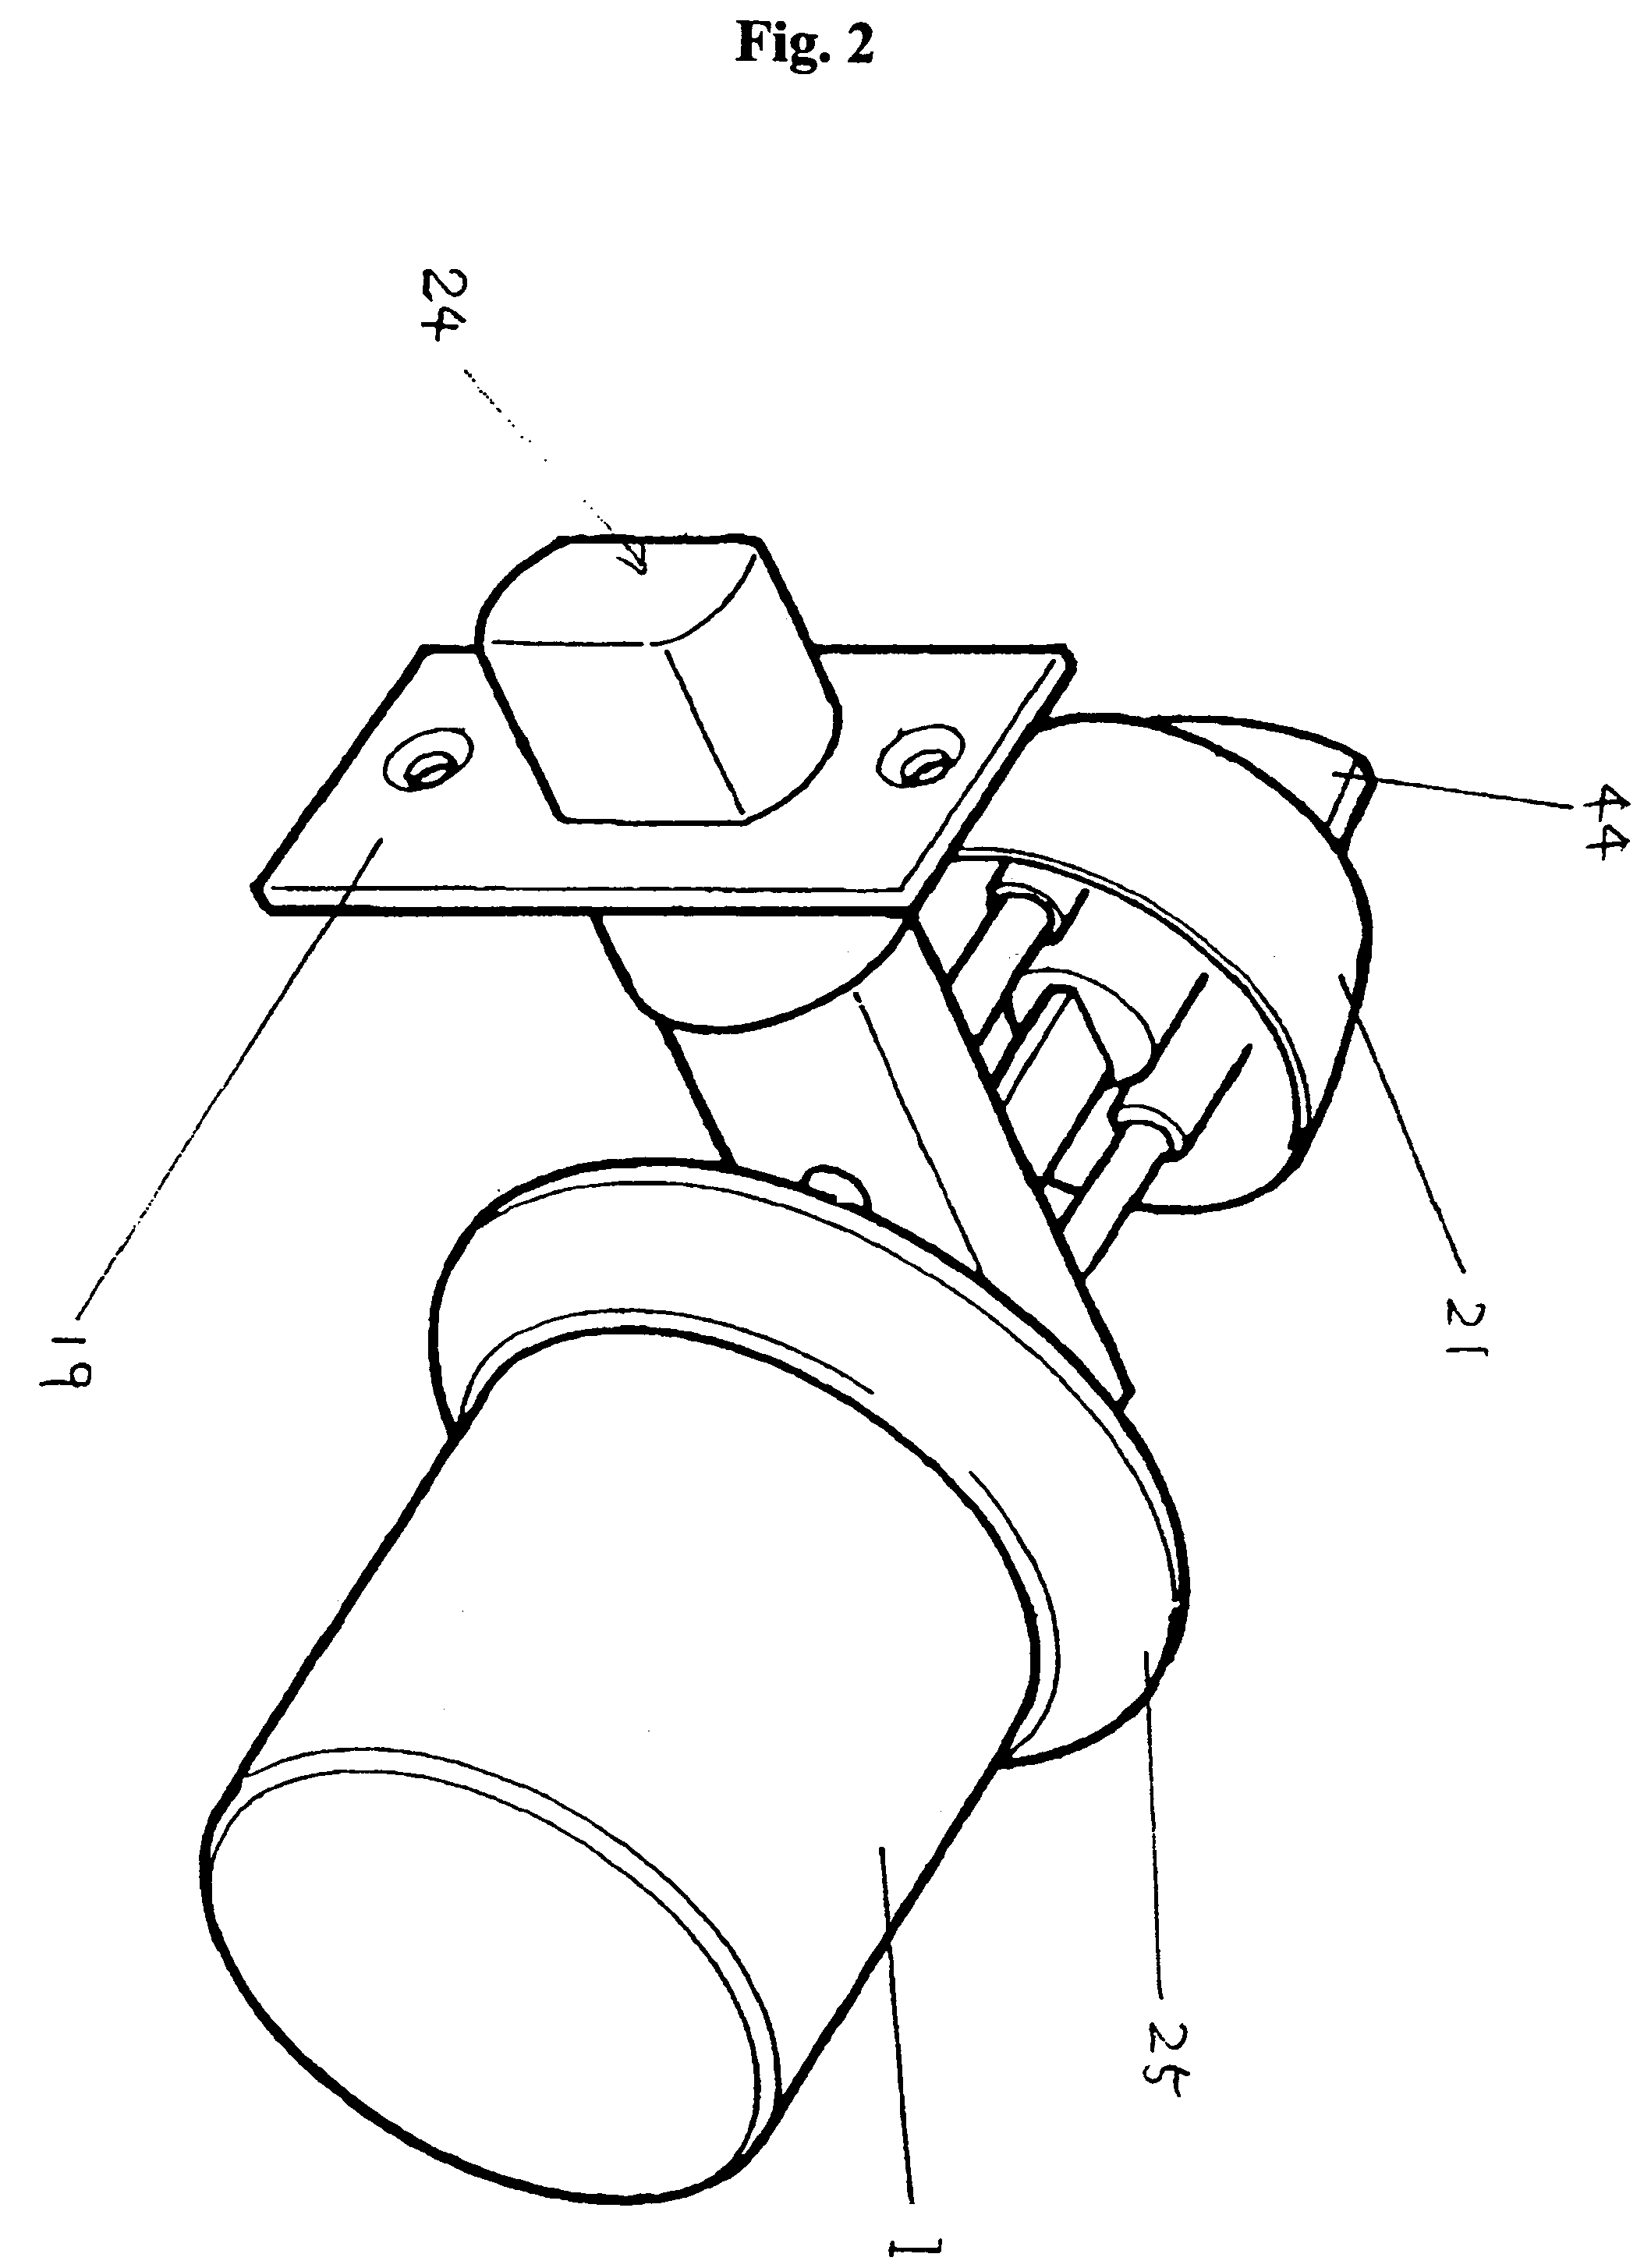 Electric cylinder for actuating a door lock and a cylinder door lock